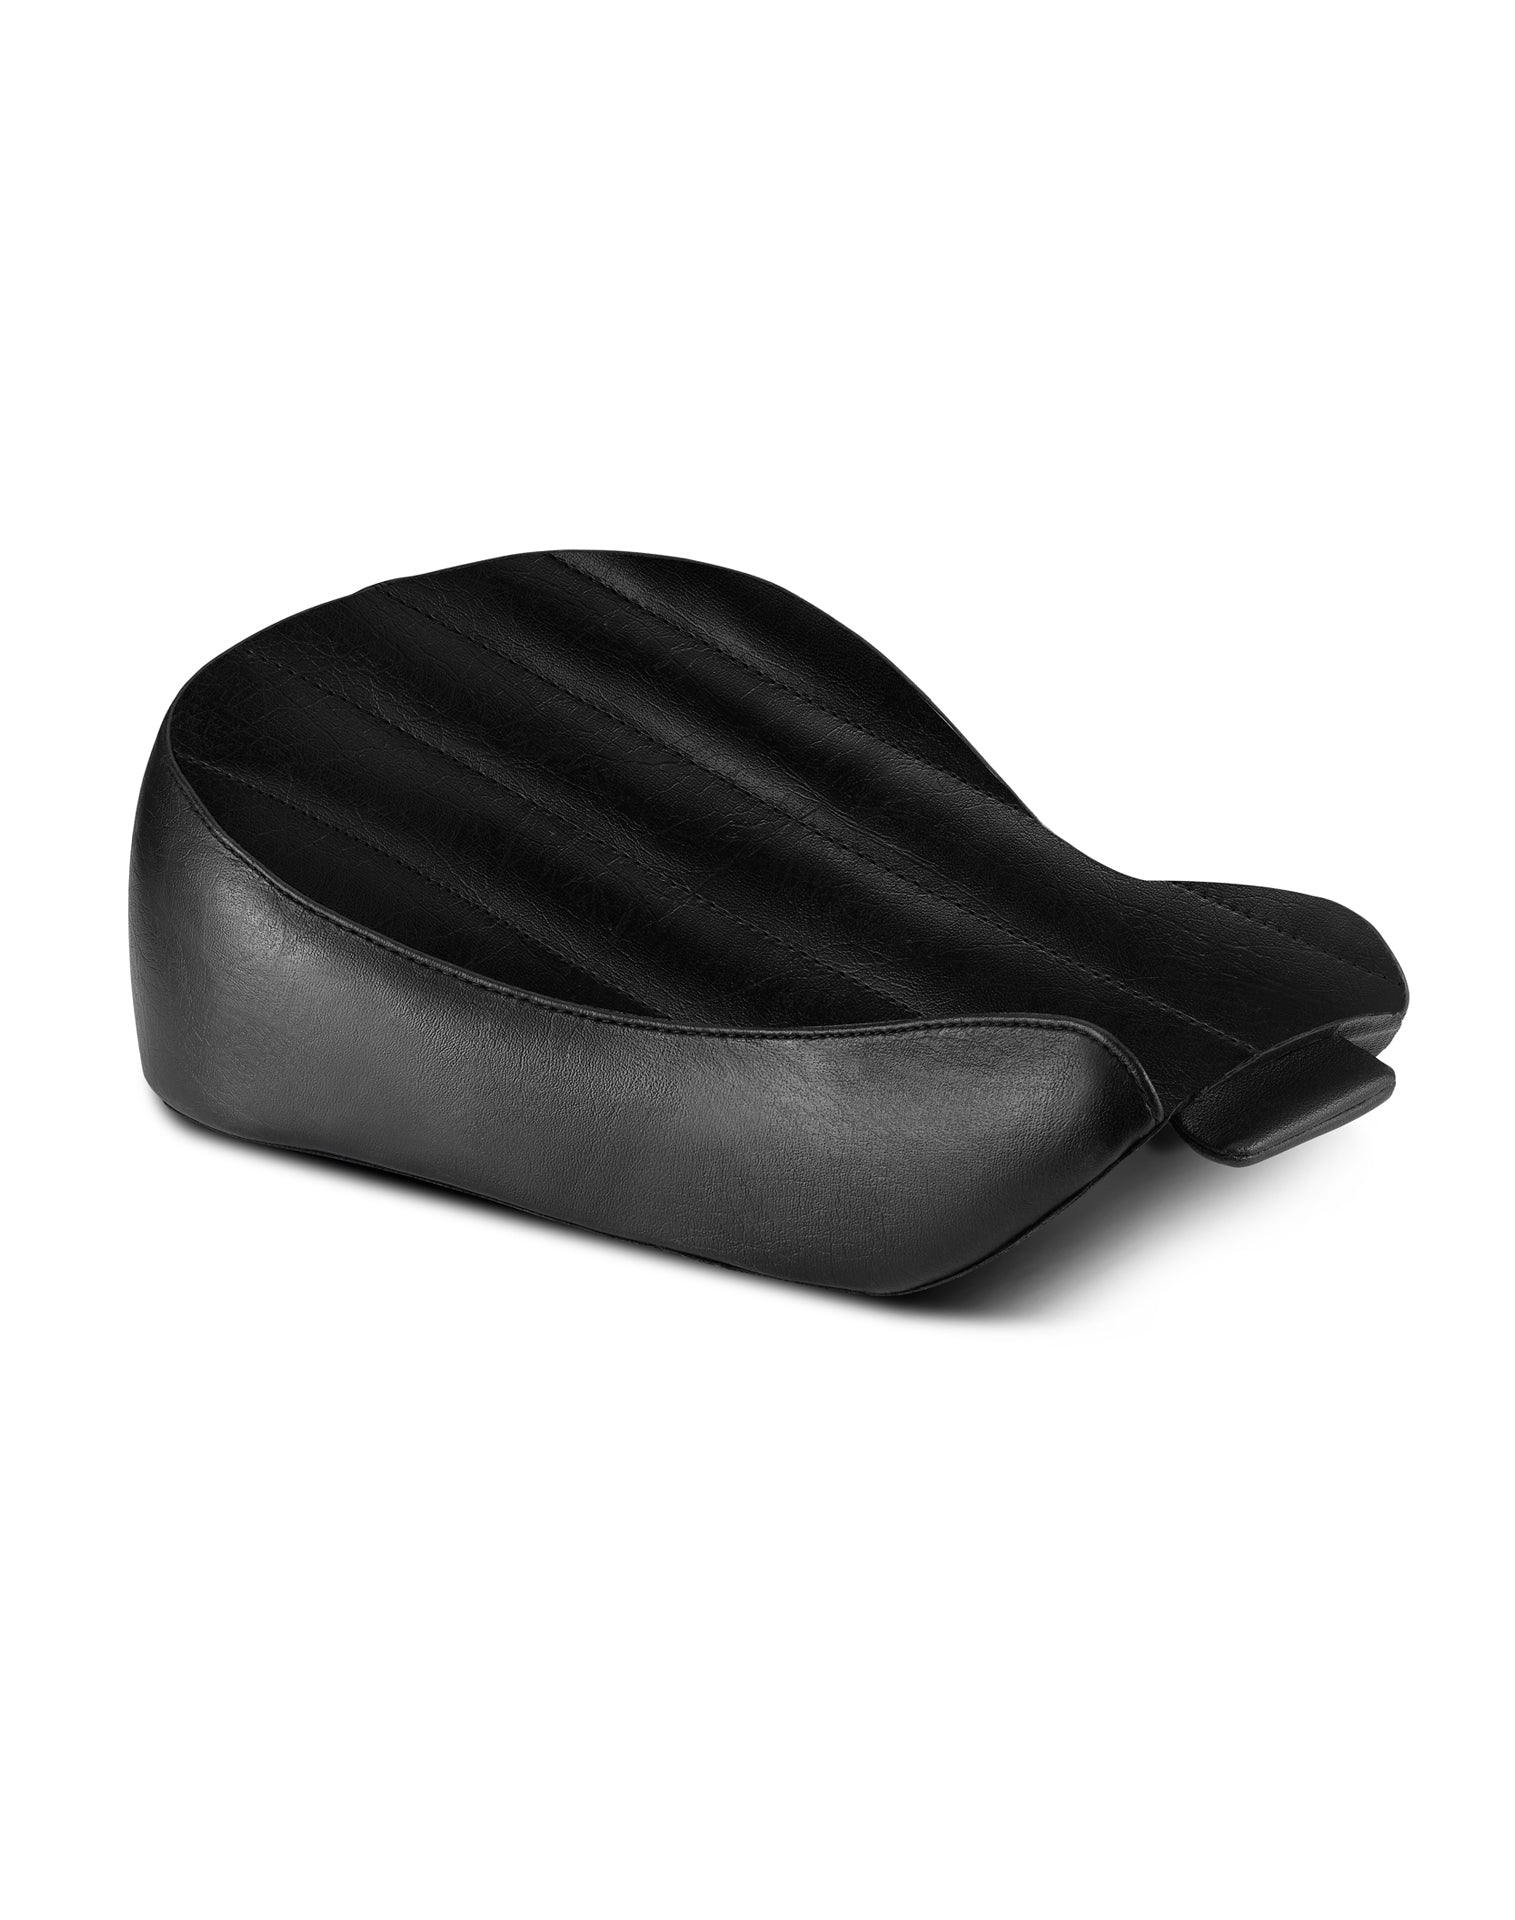 Iron Born Vertical Stitch Motorcycle Solo Seat for Harley Sportster 1200 Custom XL1200C Main view